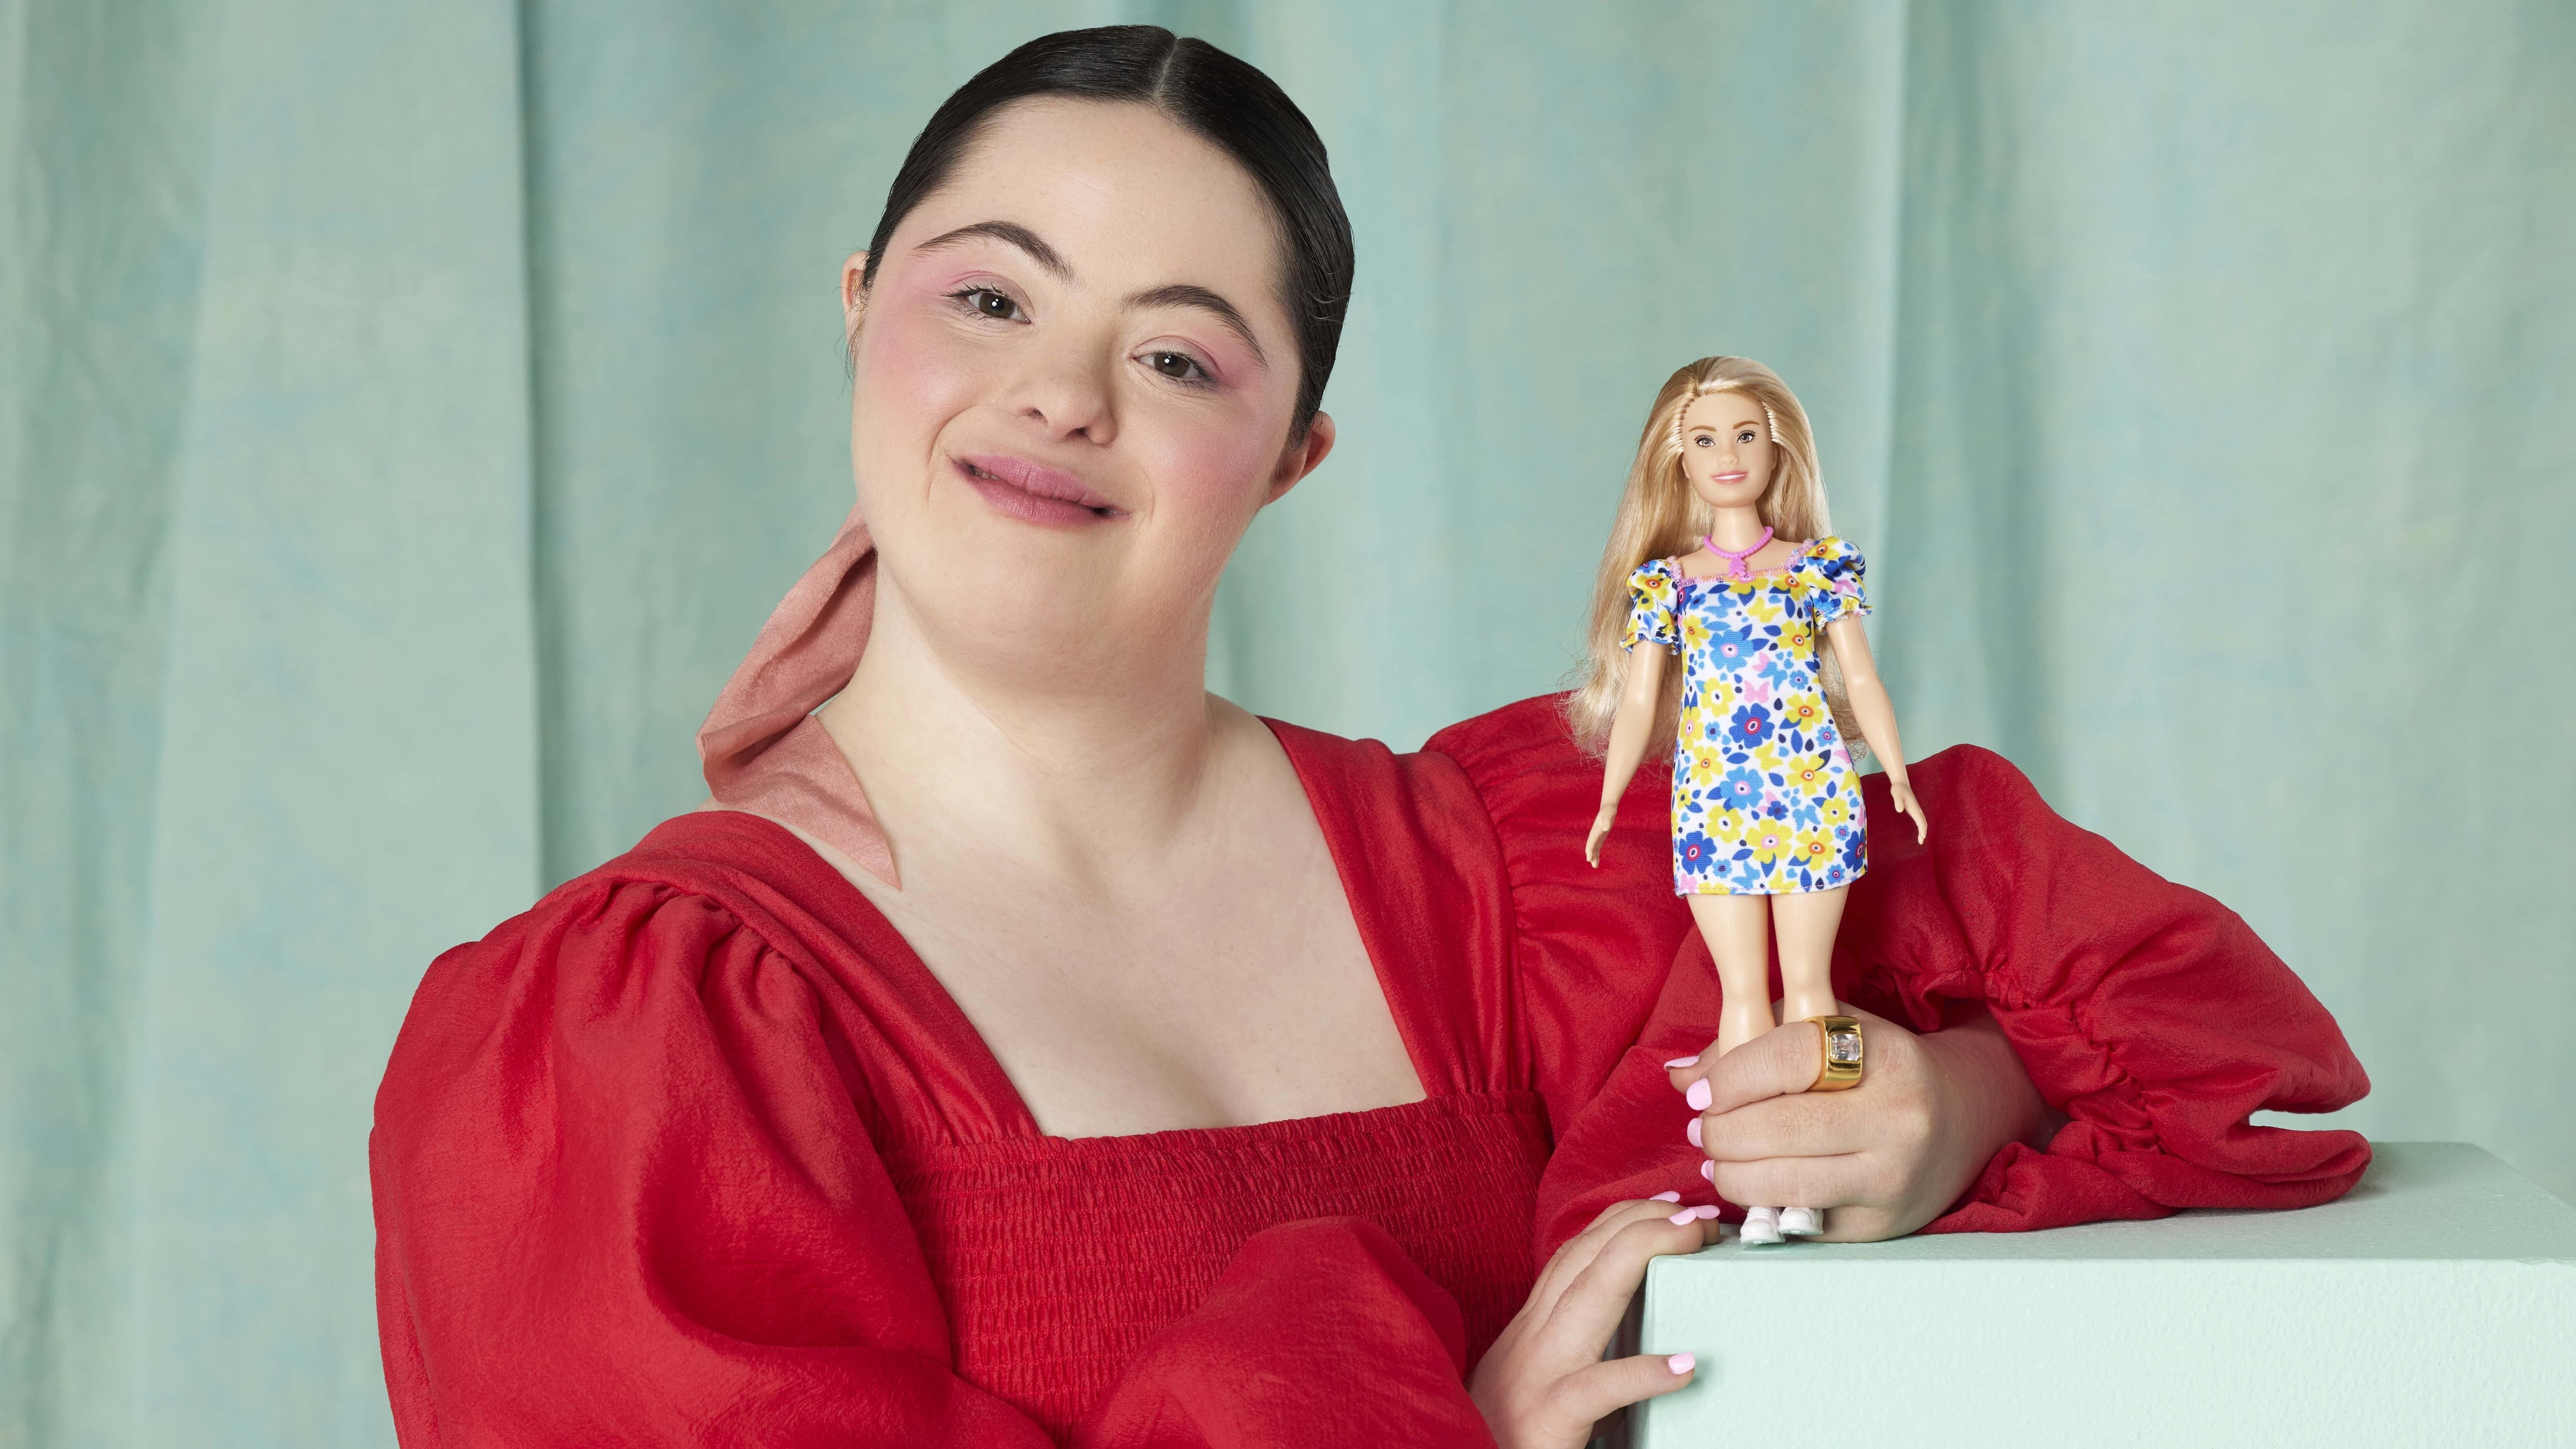 The National Down Syndrome Society in the US helped to create the doll.